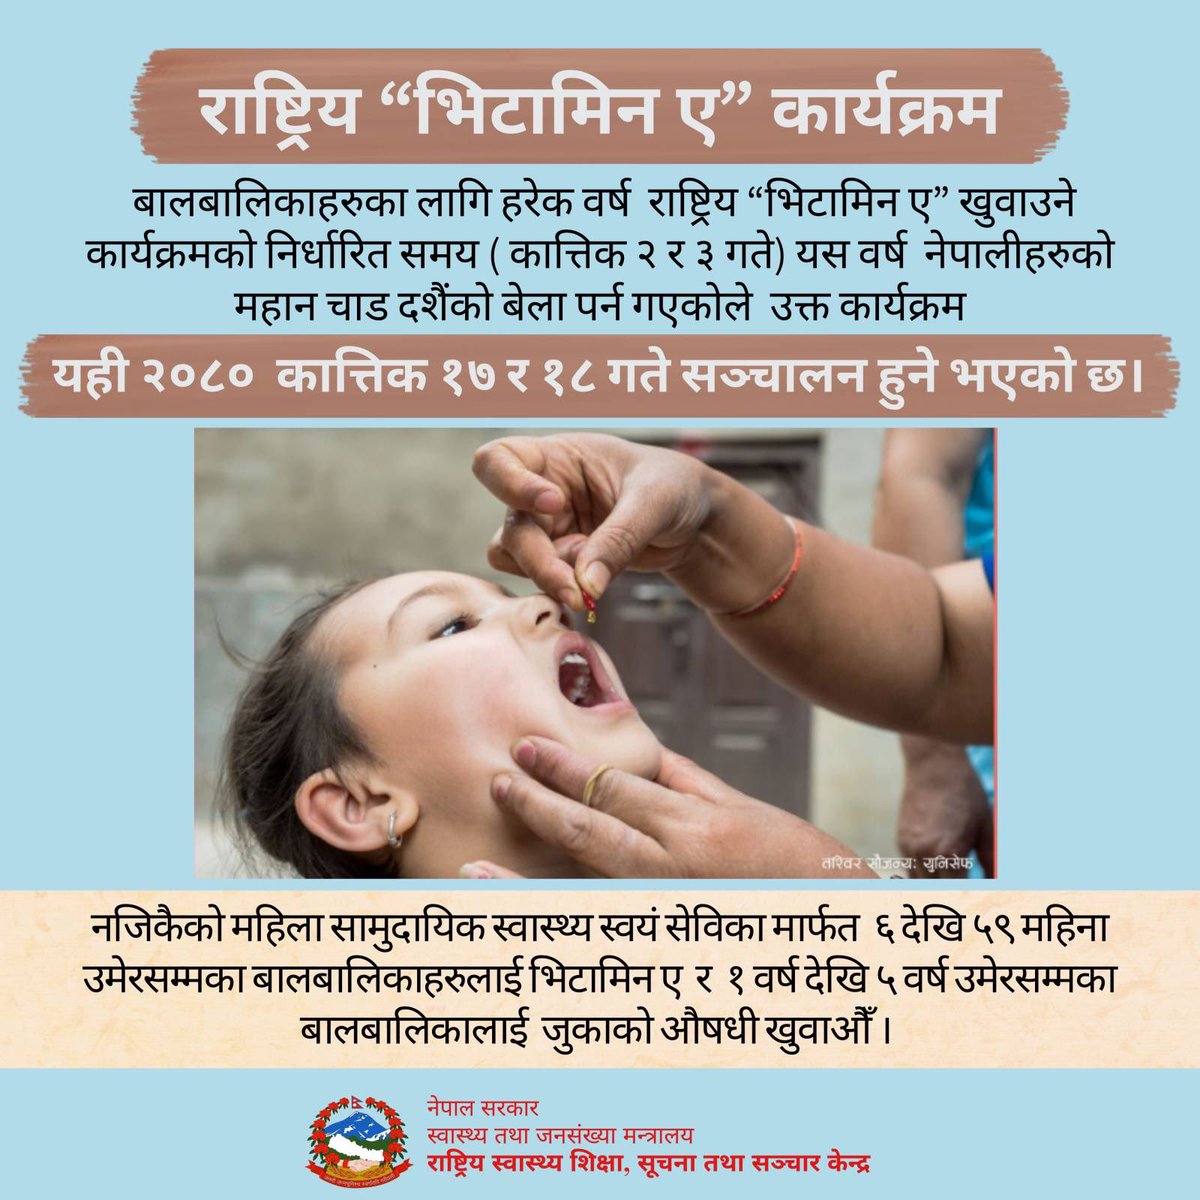 Ministry of Health & Population, Nepal (@mohpnep) on Twitter photo 2023-10-18 09:11:29